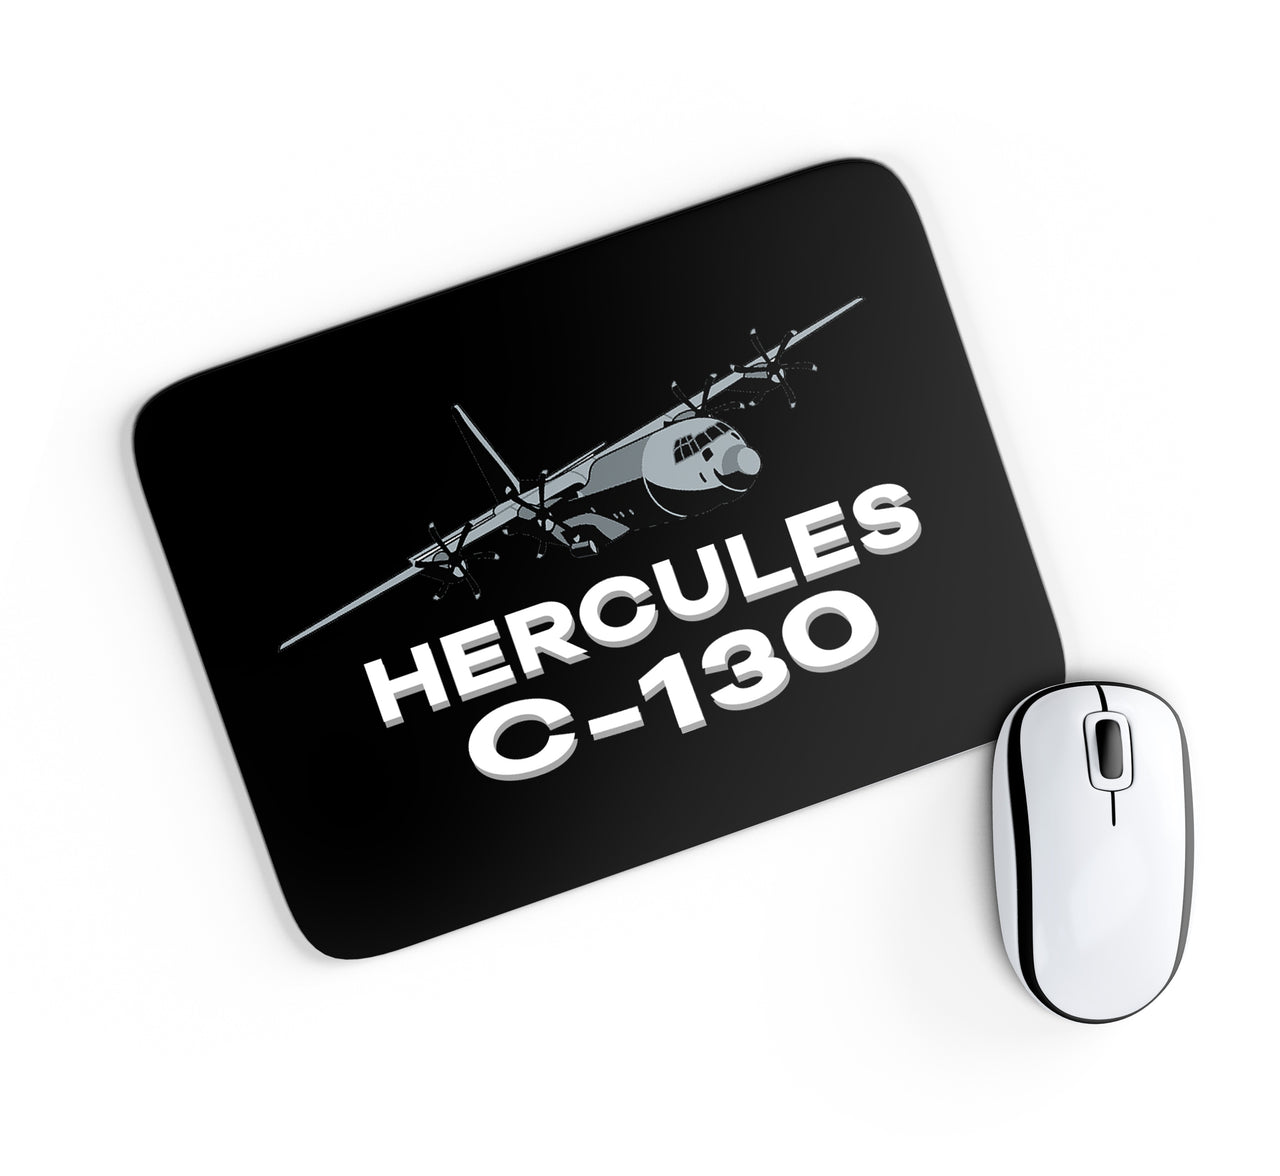 The Hercules C130 Designed Mouse Pads